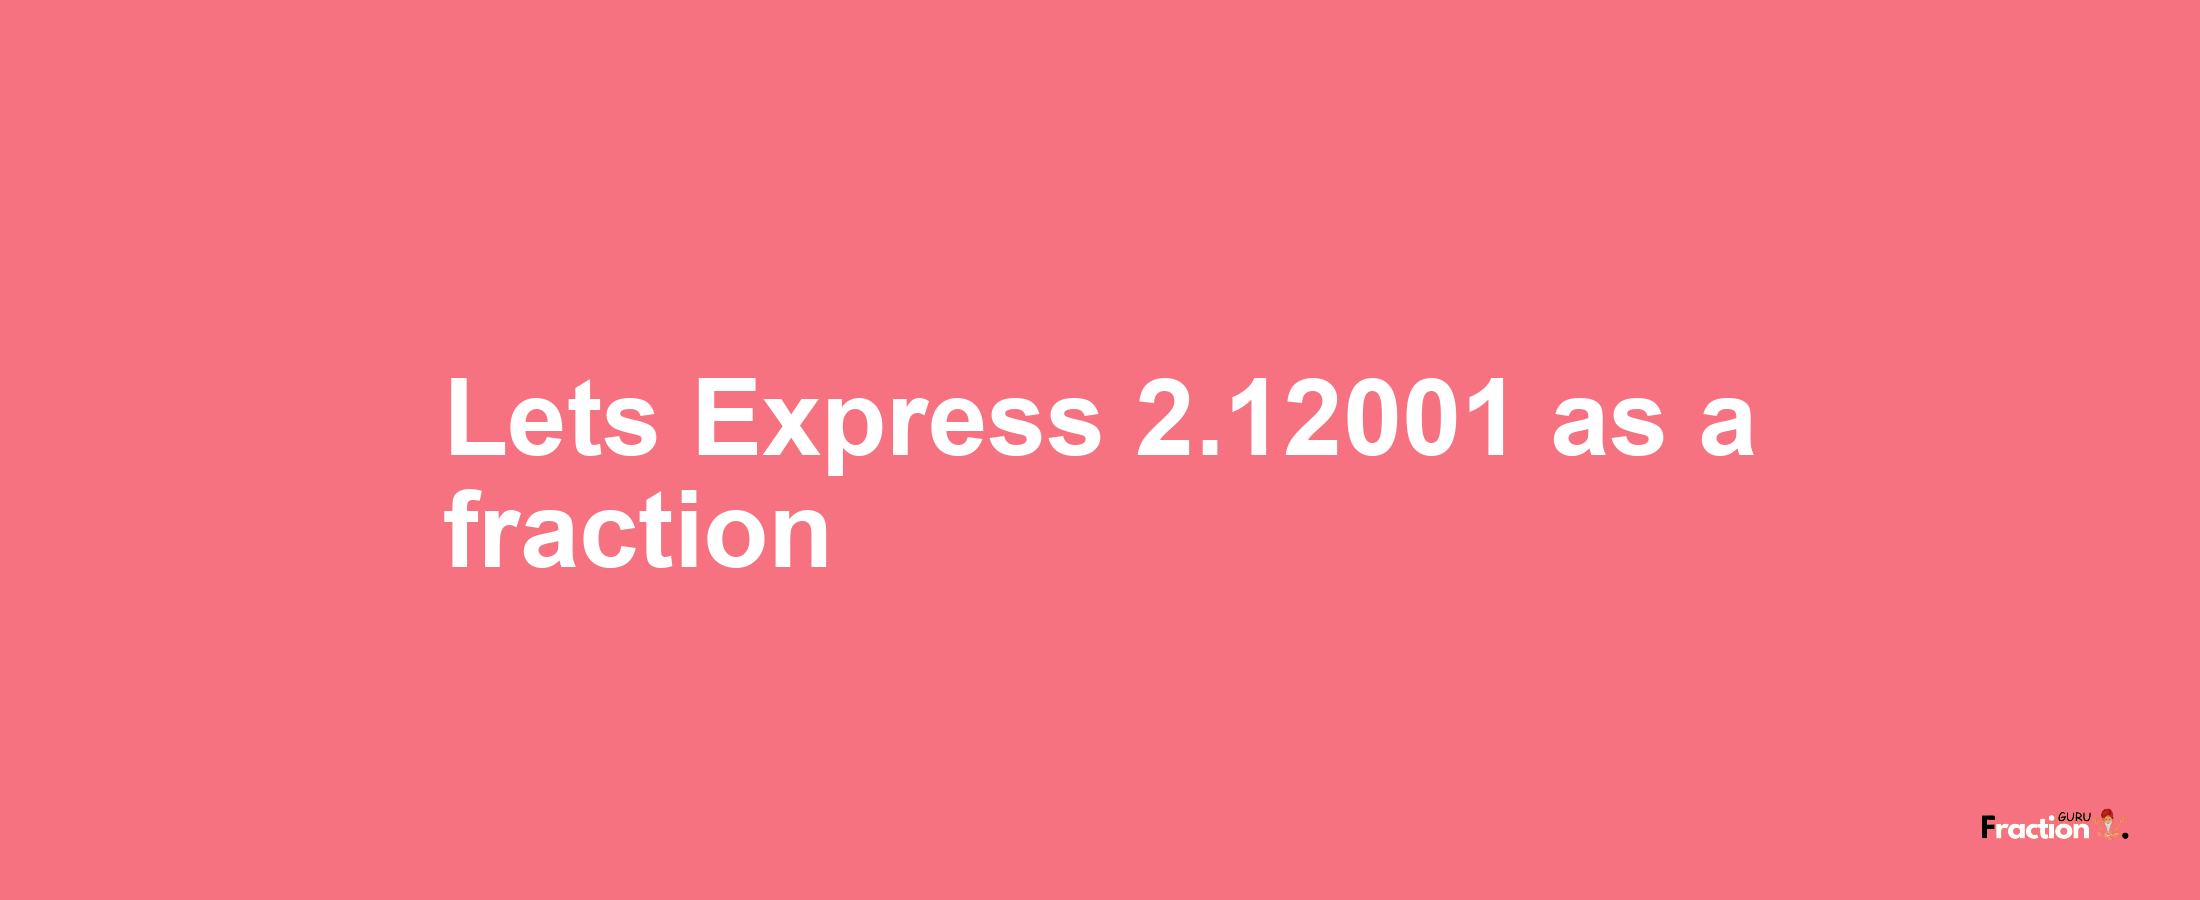 Lets Express 2.12001 as afraction